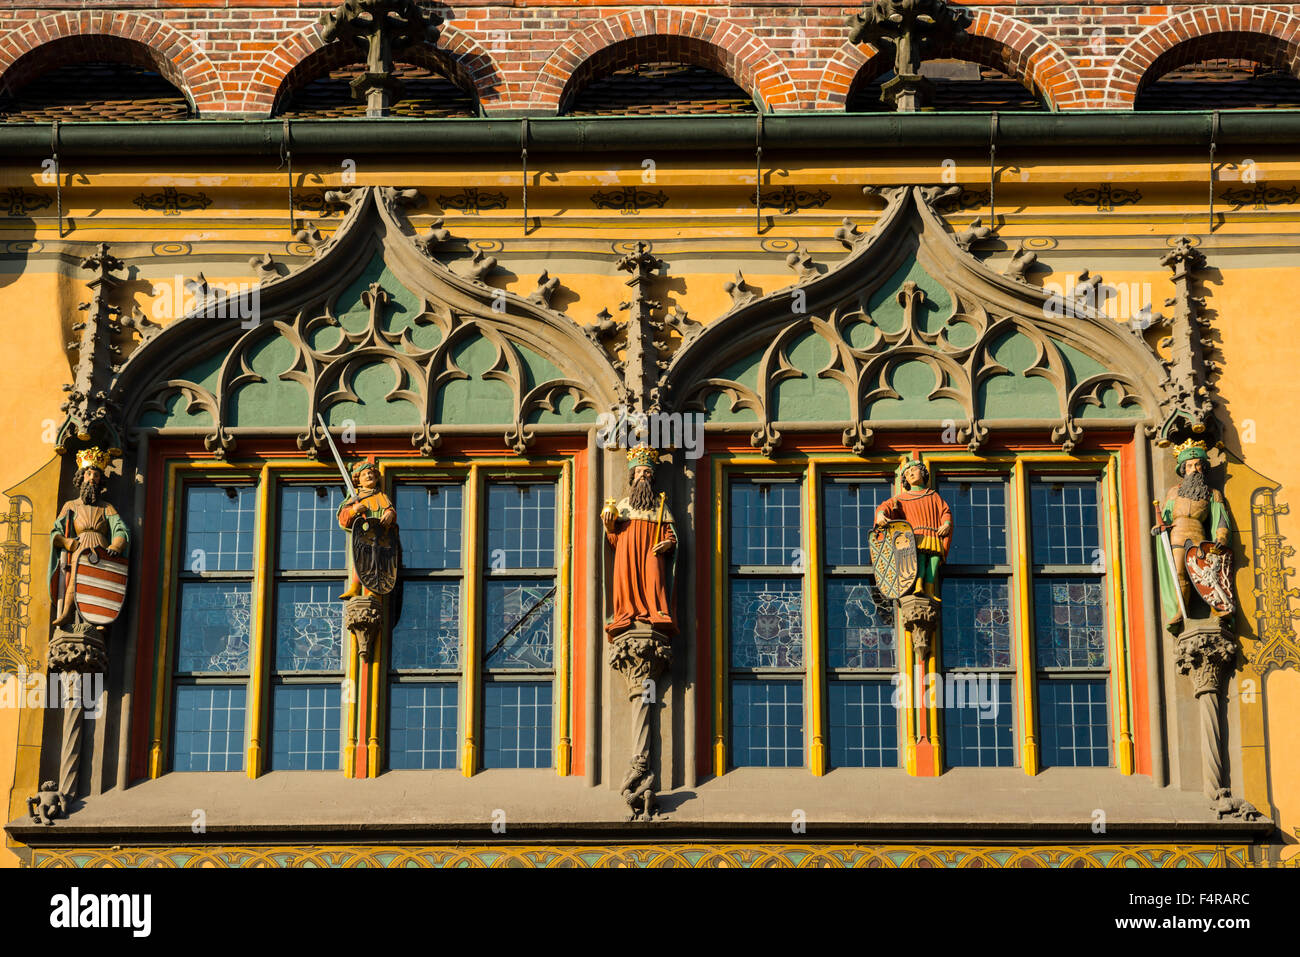 Swabian Alb, architecture, historic, architectural monument, Germany, Europe, facade, facade painting, frescoes, early Renaissan Stock Photo